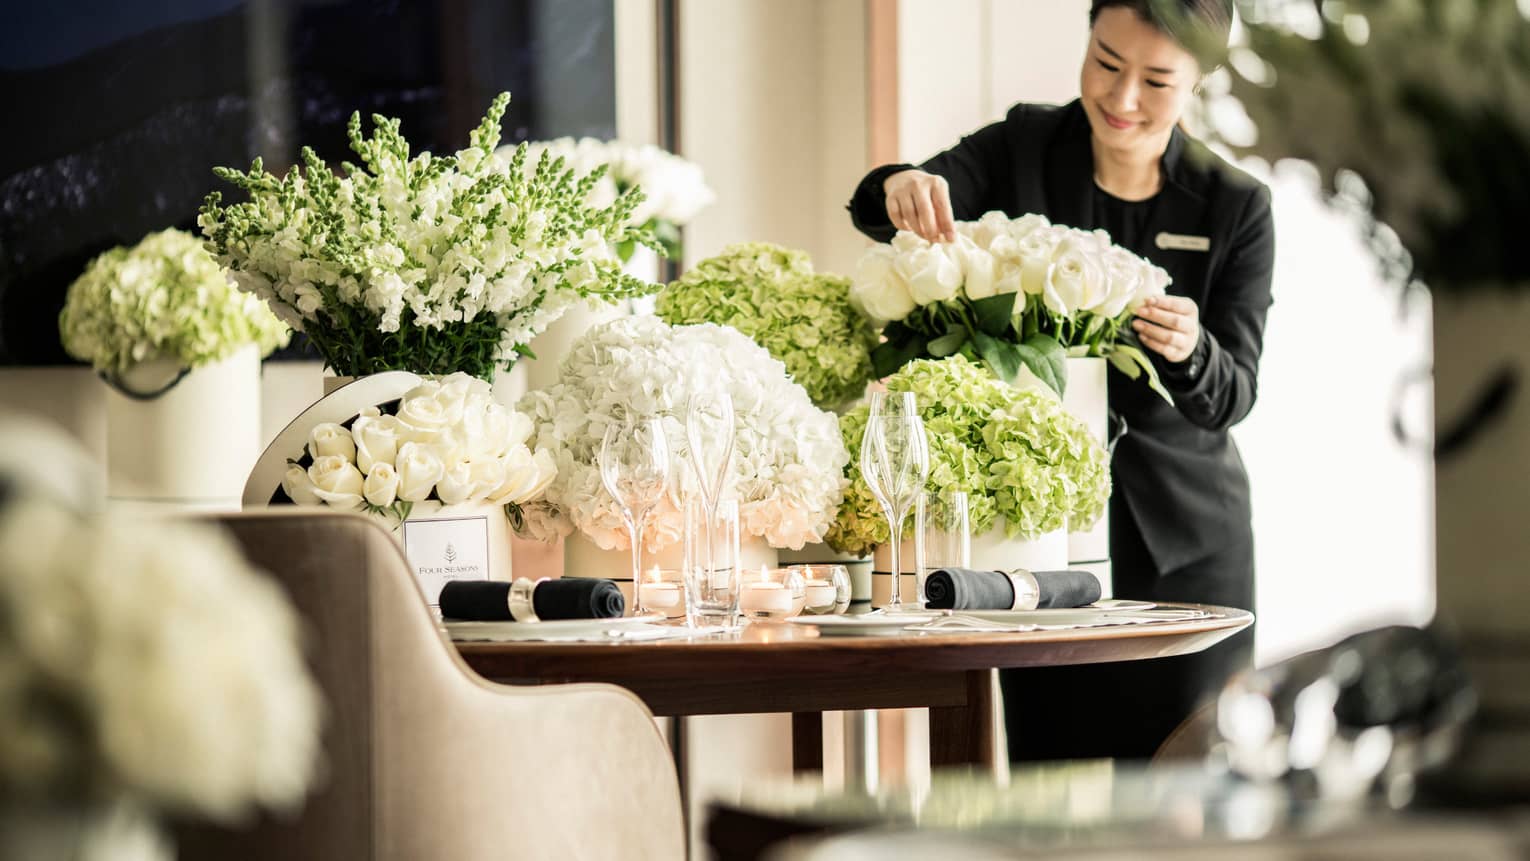 Hotel staff arranges white roses in vase on table with large vases, white flowers